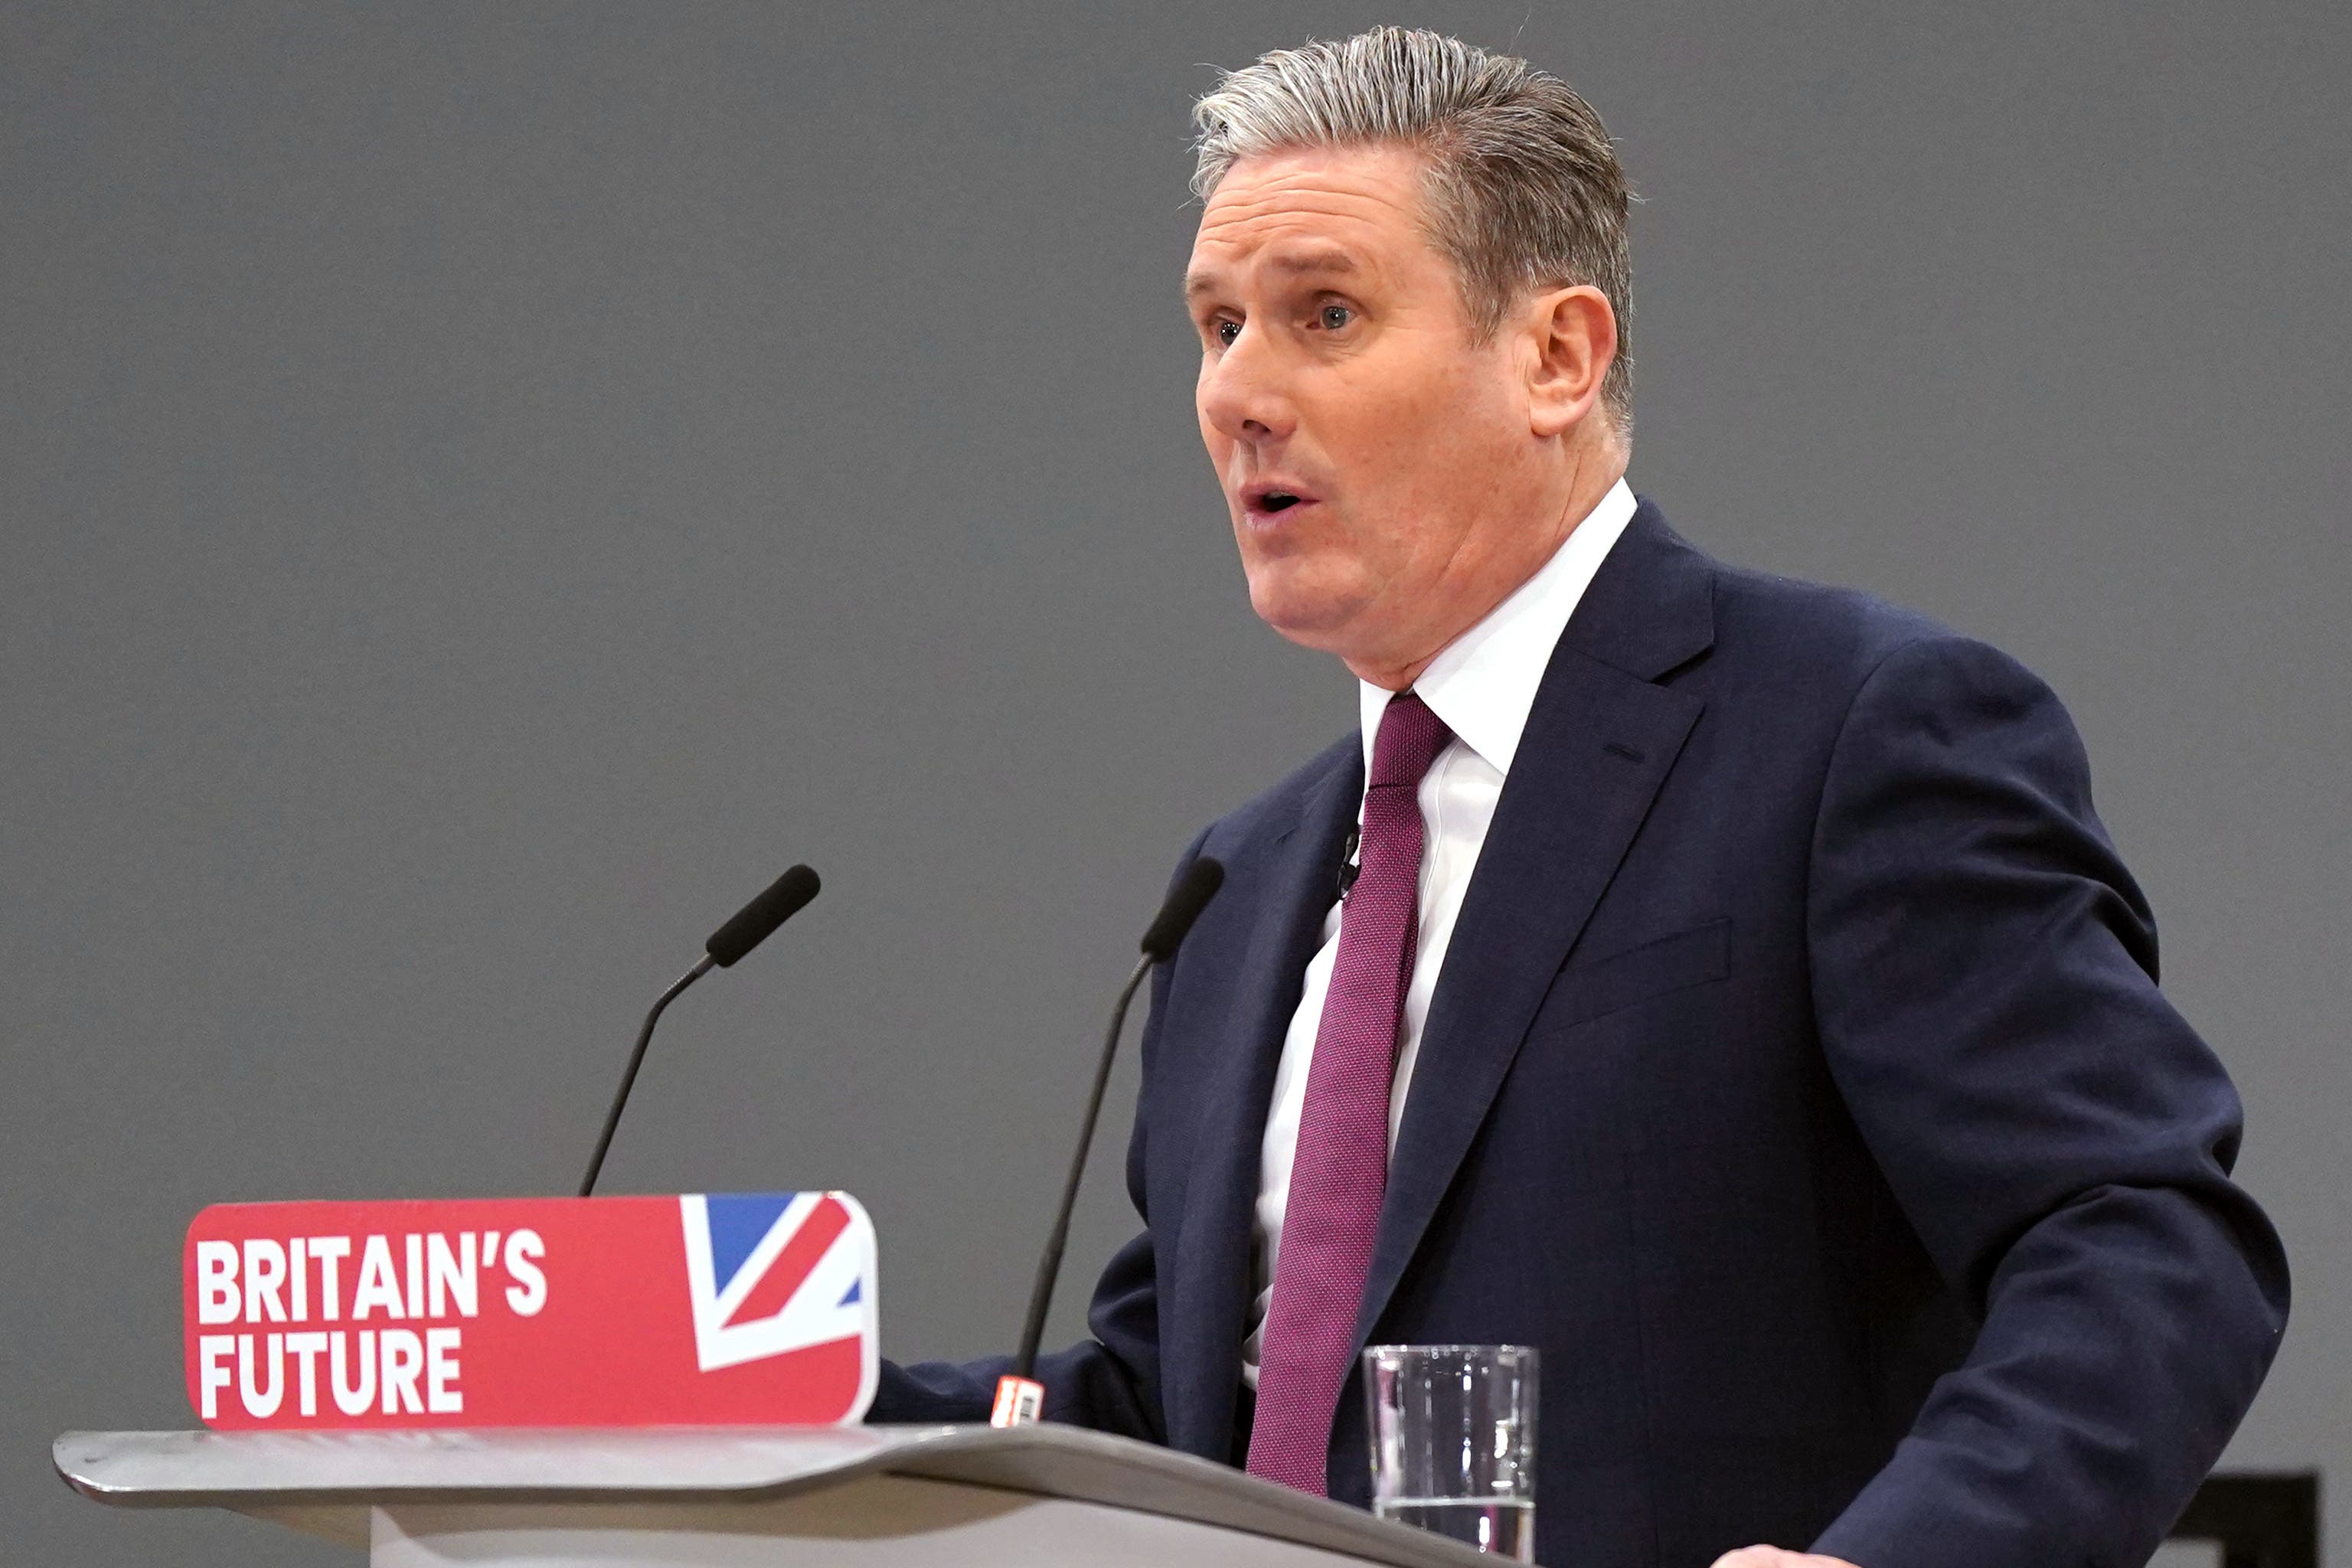 Labour leader Starmer gives a speech in Silverstone, to mark the fourth anniversary of his party’s most recent electoral wipeout